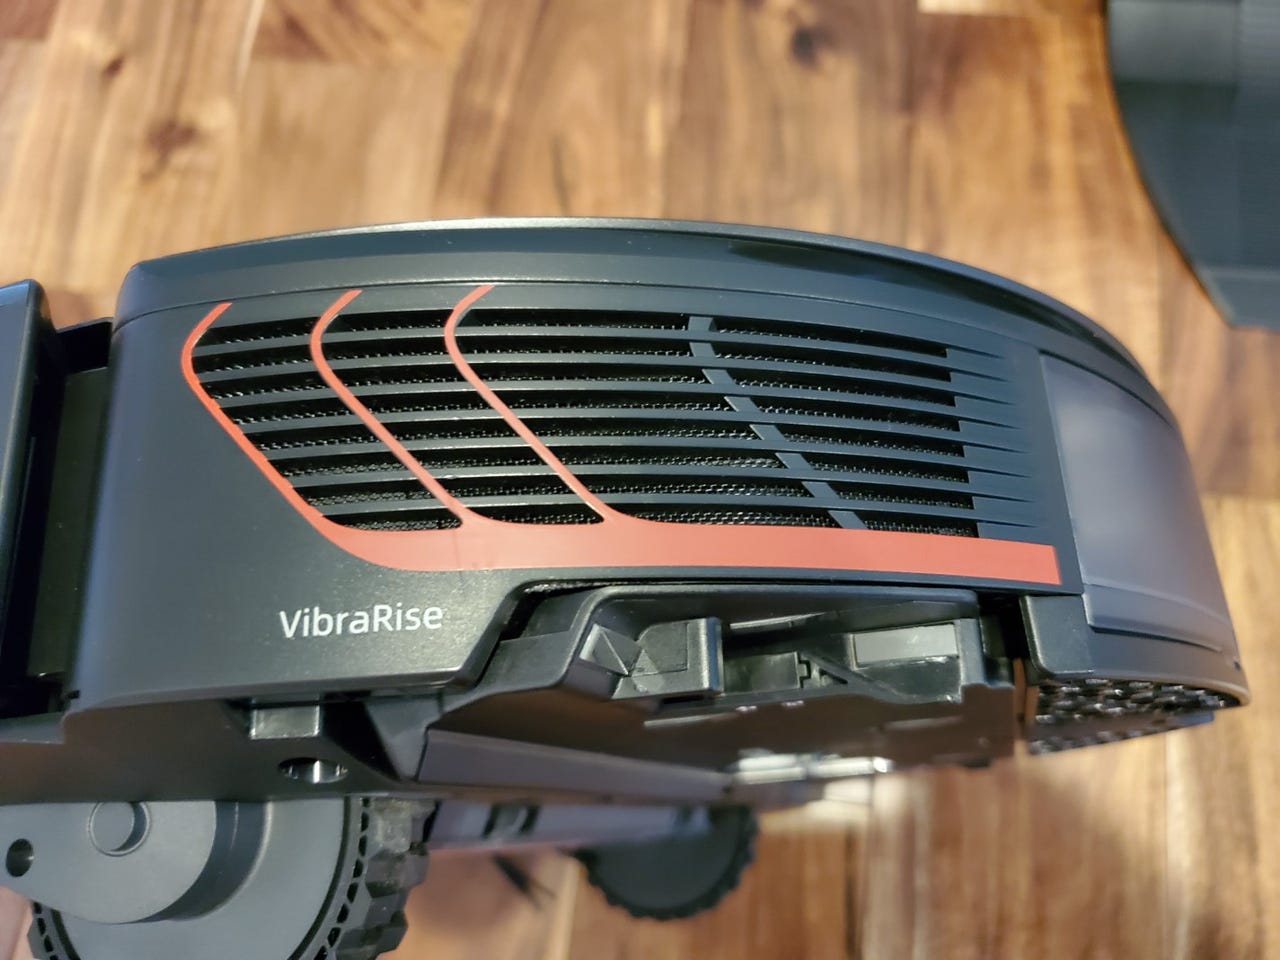 Roborock S7 MaxV Ultra review: Most trustworthy robot vacuum and mop ever